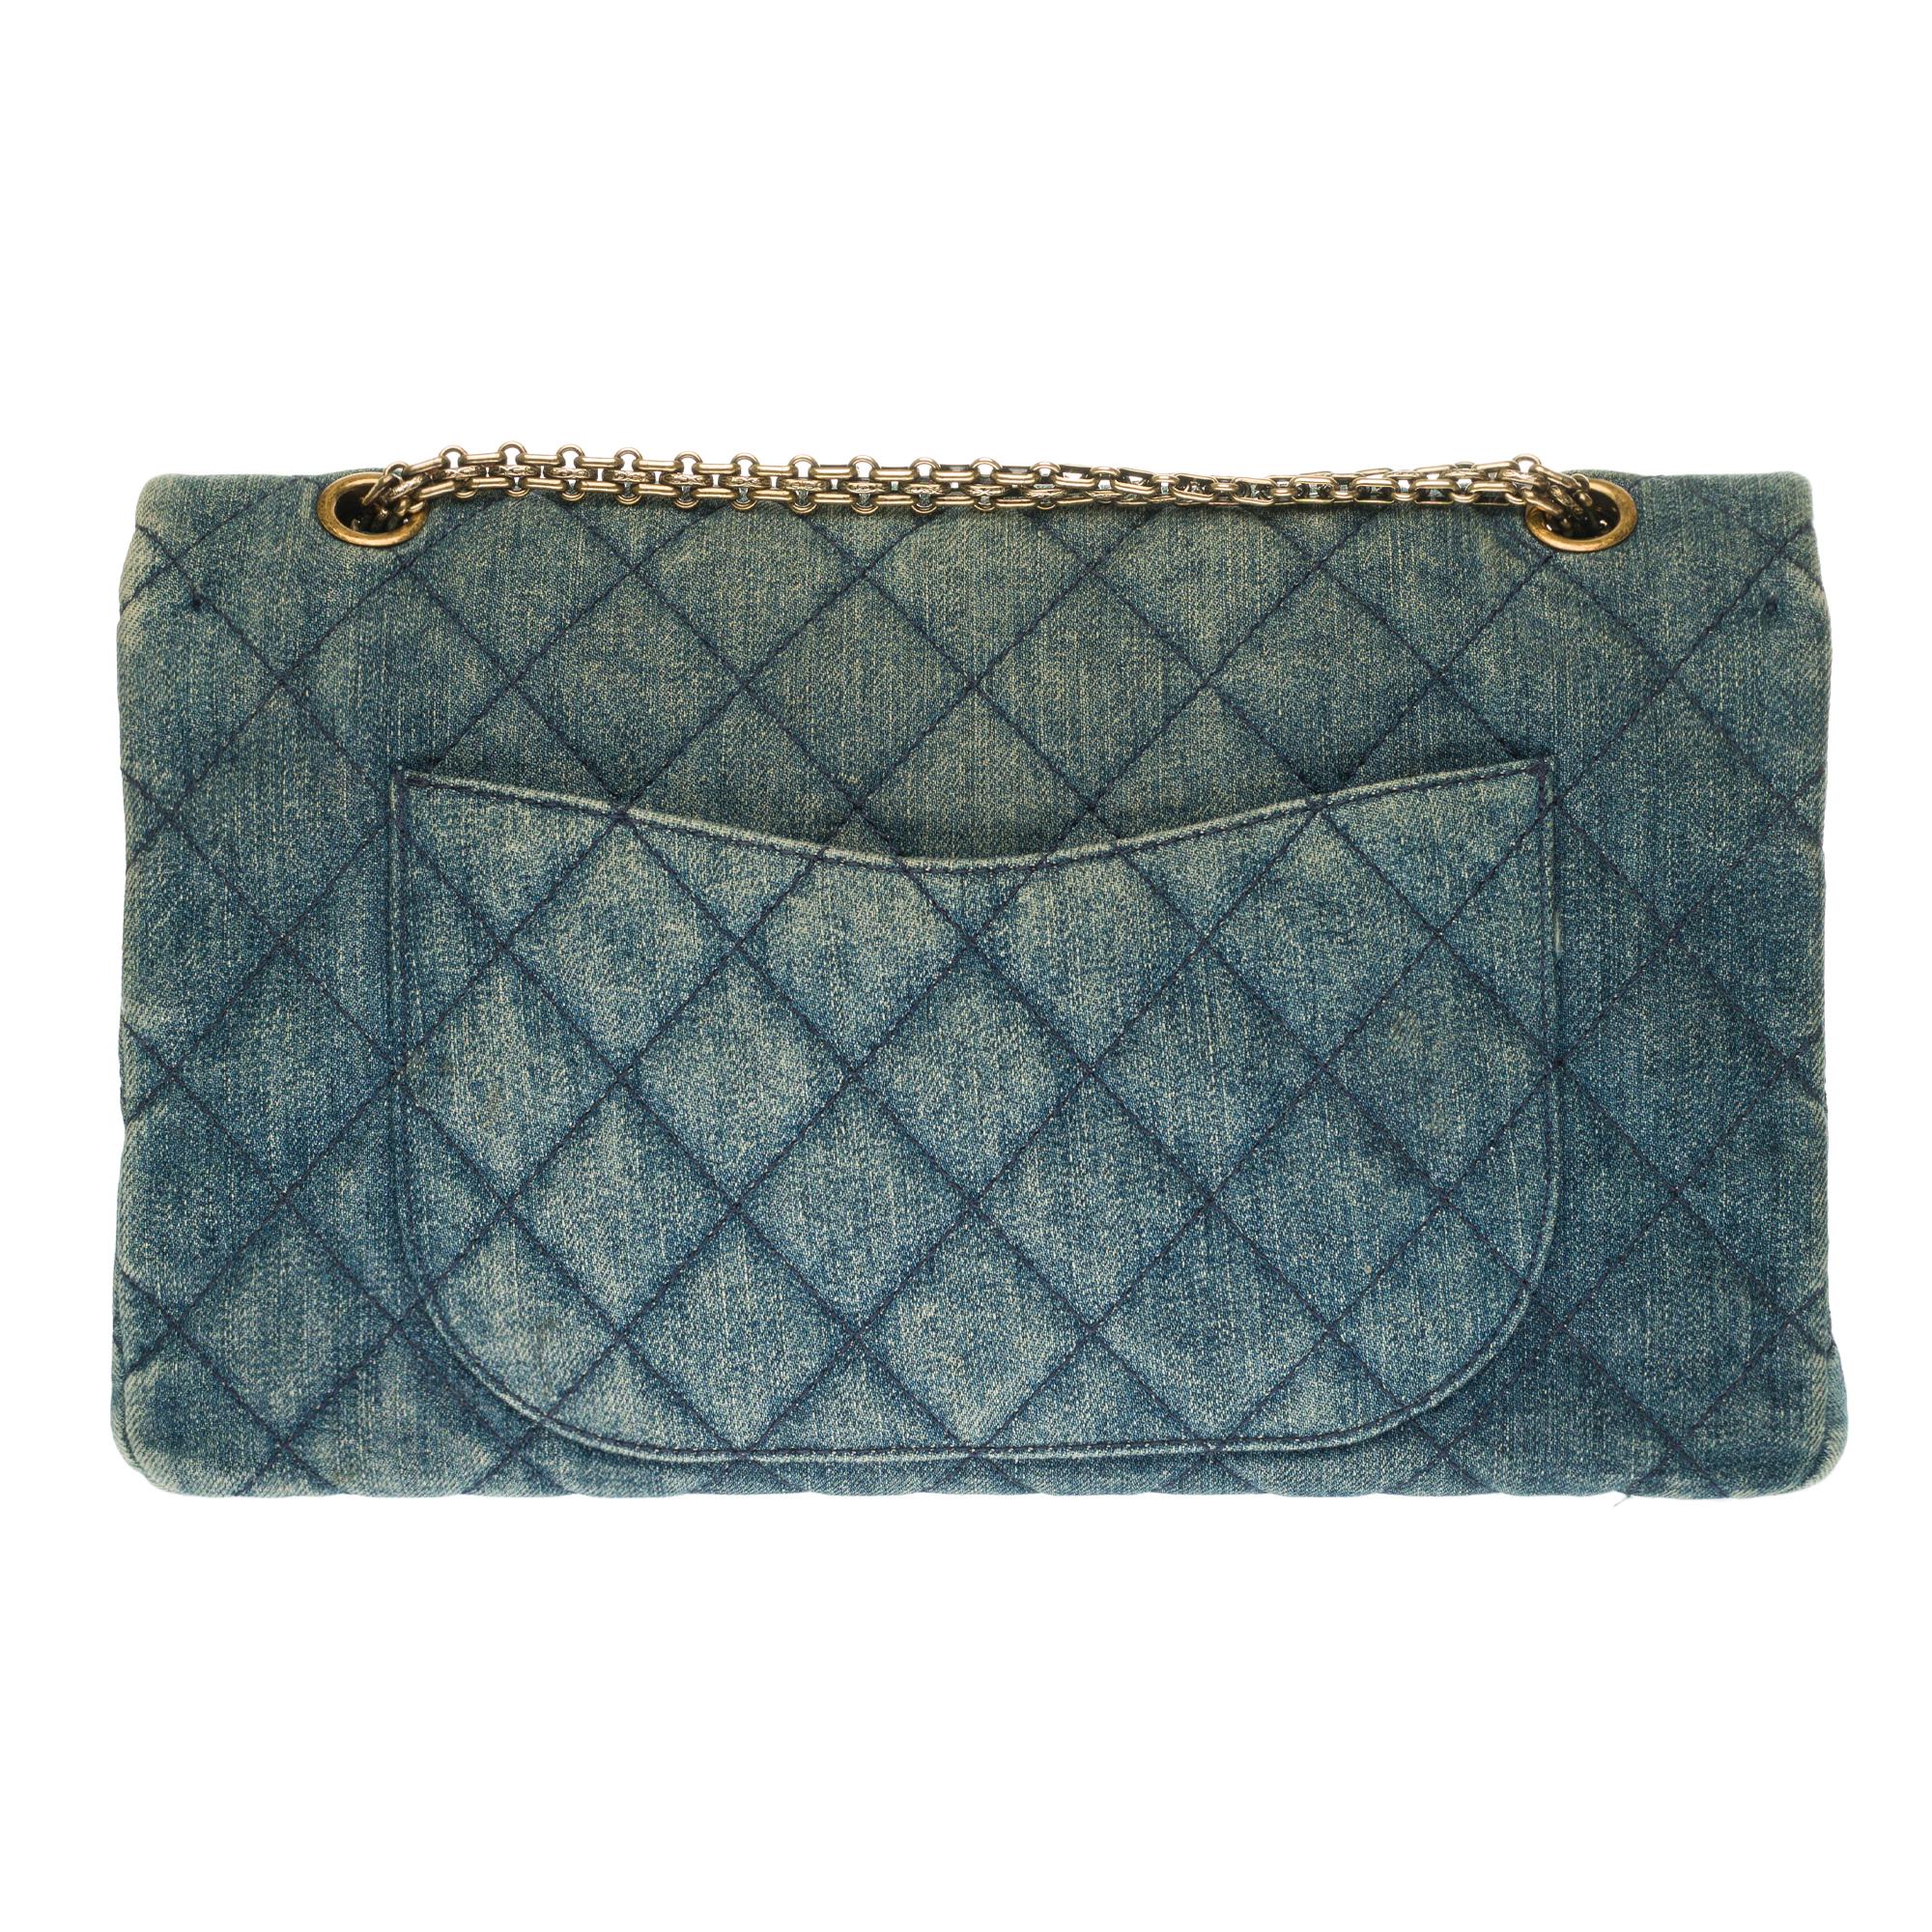 Splendid handbag Chanel 2.55 Reissue 227 in blue quilted denim, silver metal hardware, a Mademoiselle chain  in silver metal allowing a hand or shoulder strap.

Mademoiselle closure in bronze metal on flap.
A patch pocket on the back of the